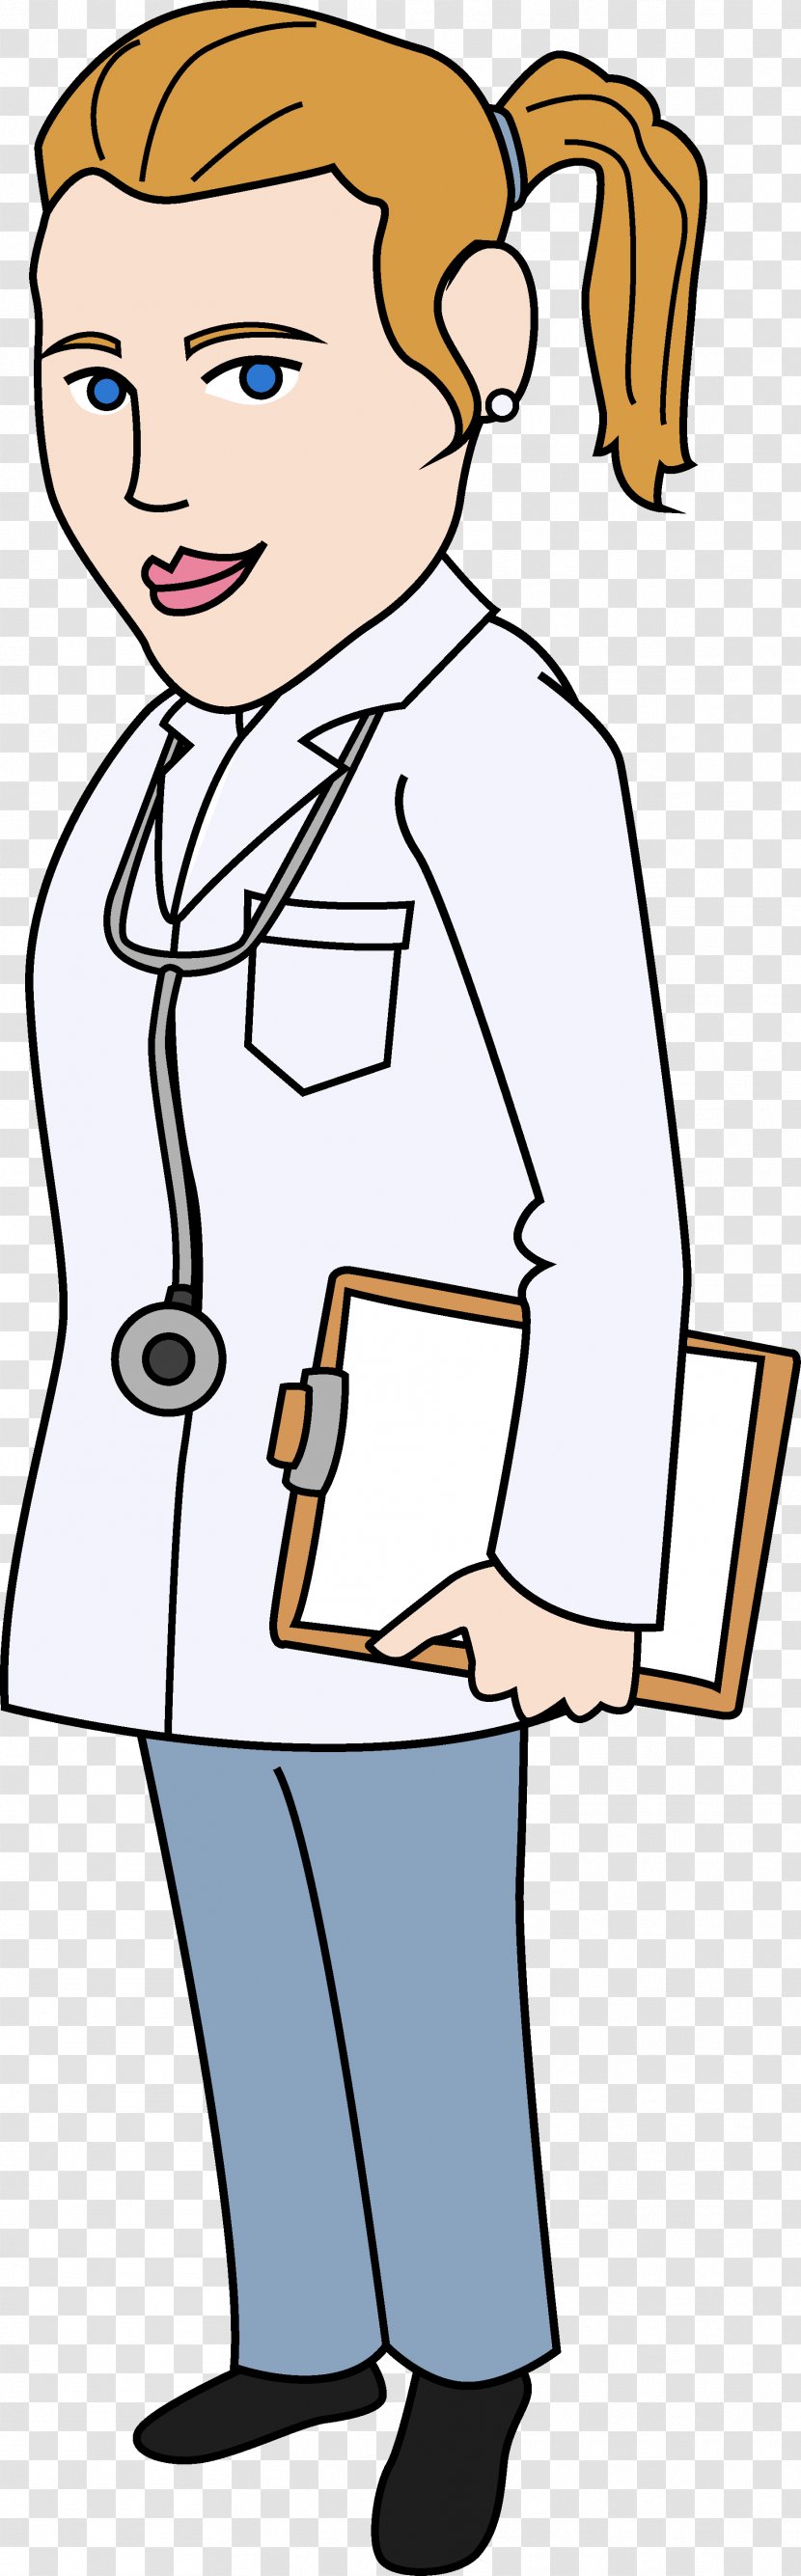 Physician Free Content Medicine Clip Art - Frame - Doctor Tray Cliparts Transparent PNG